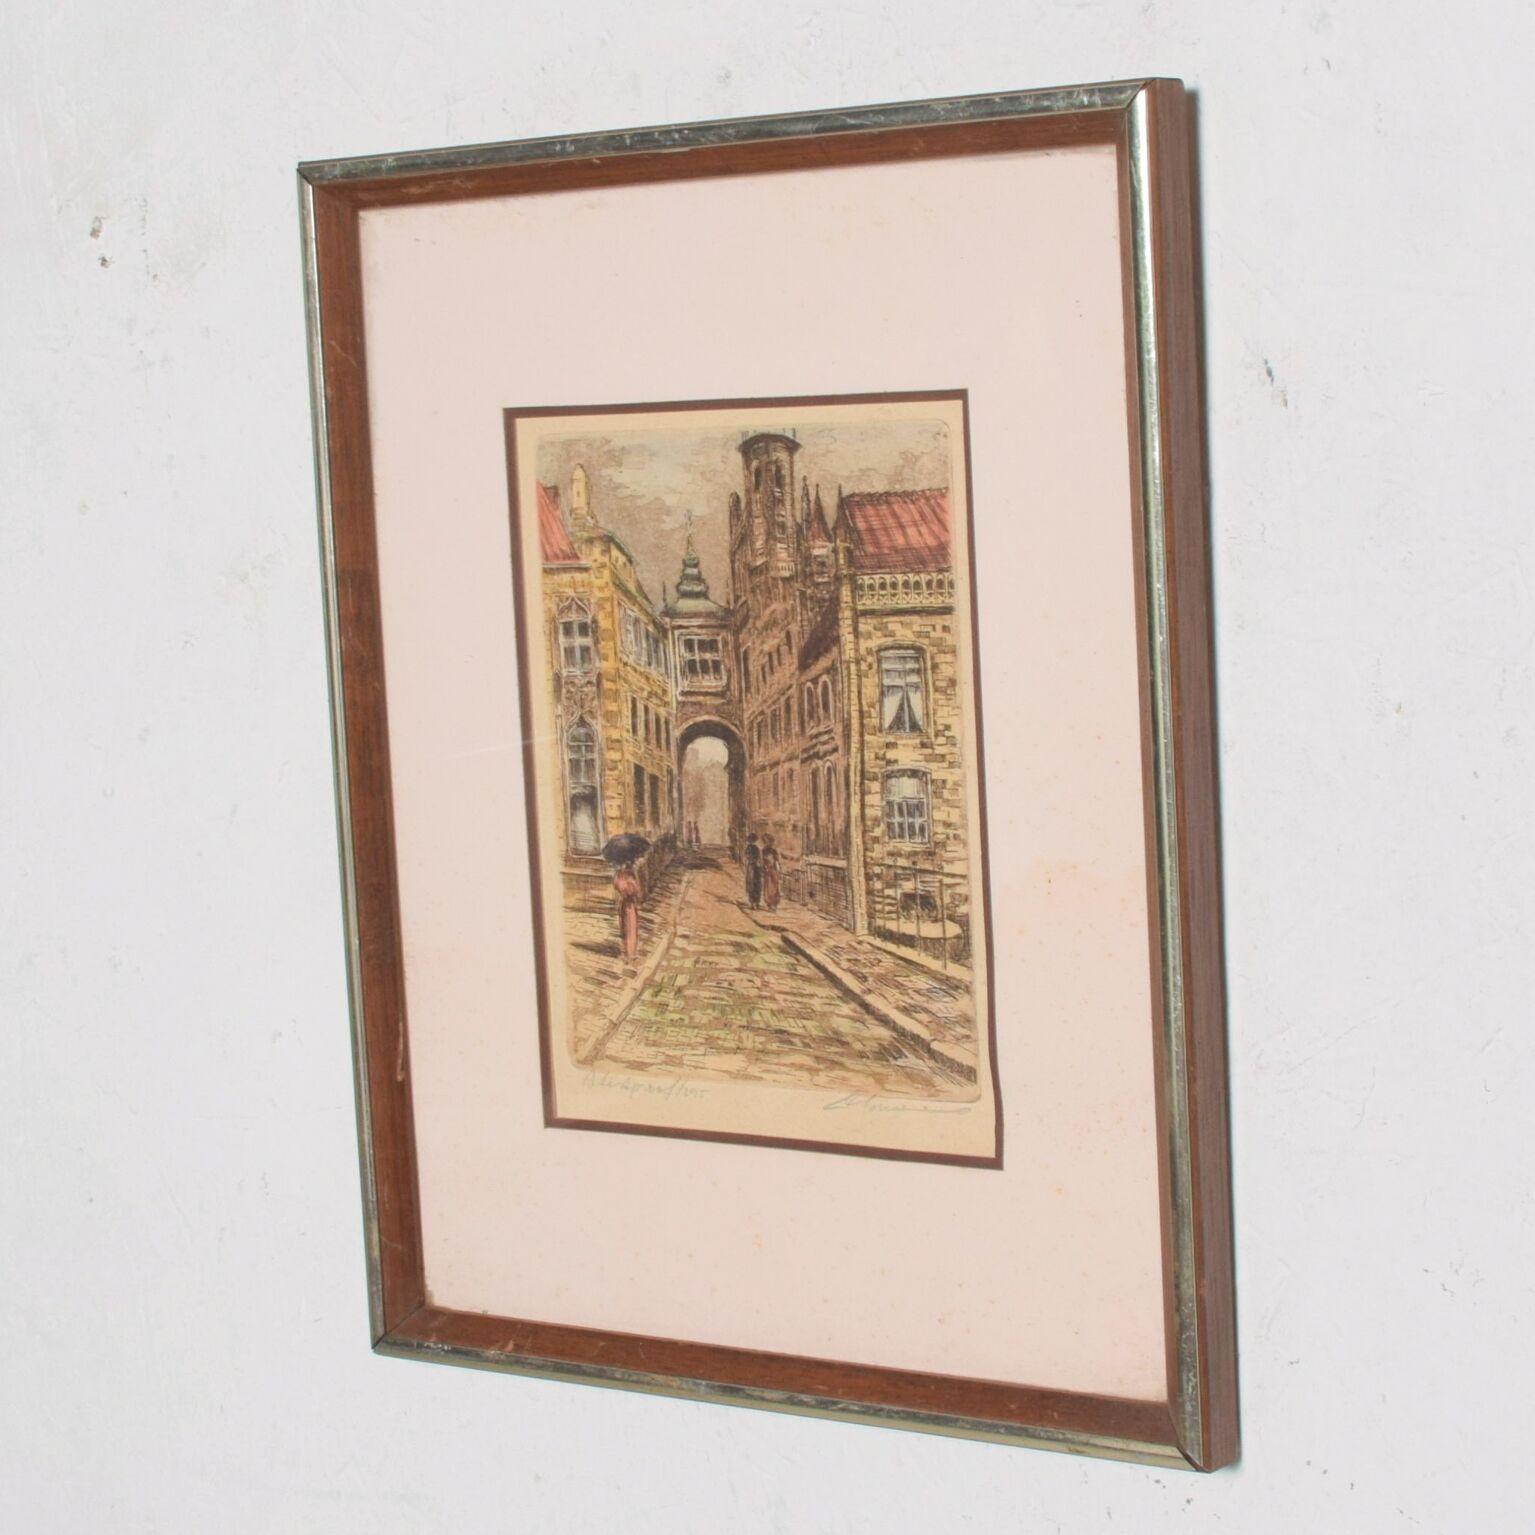 European Landscape, Art Piece Serigraph  
Signed in pencil lower right, Mariah. 
Original frame. Title name on lower left side. Original frame. 
Type appears as embossed serigraph. 
 12